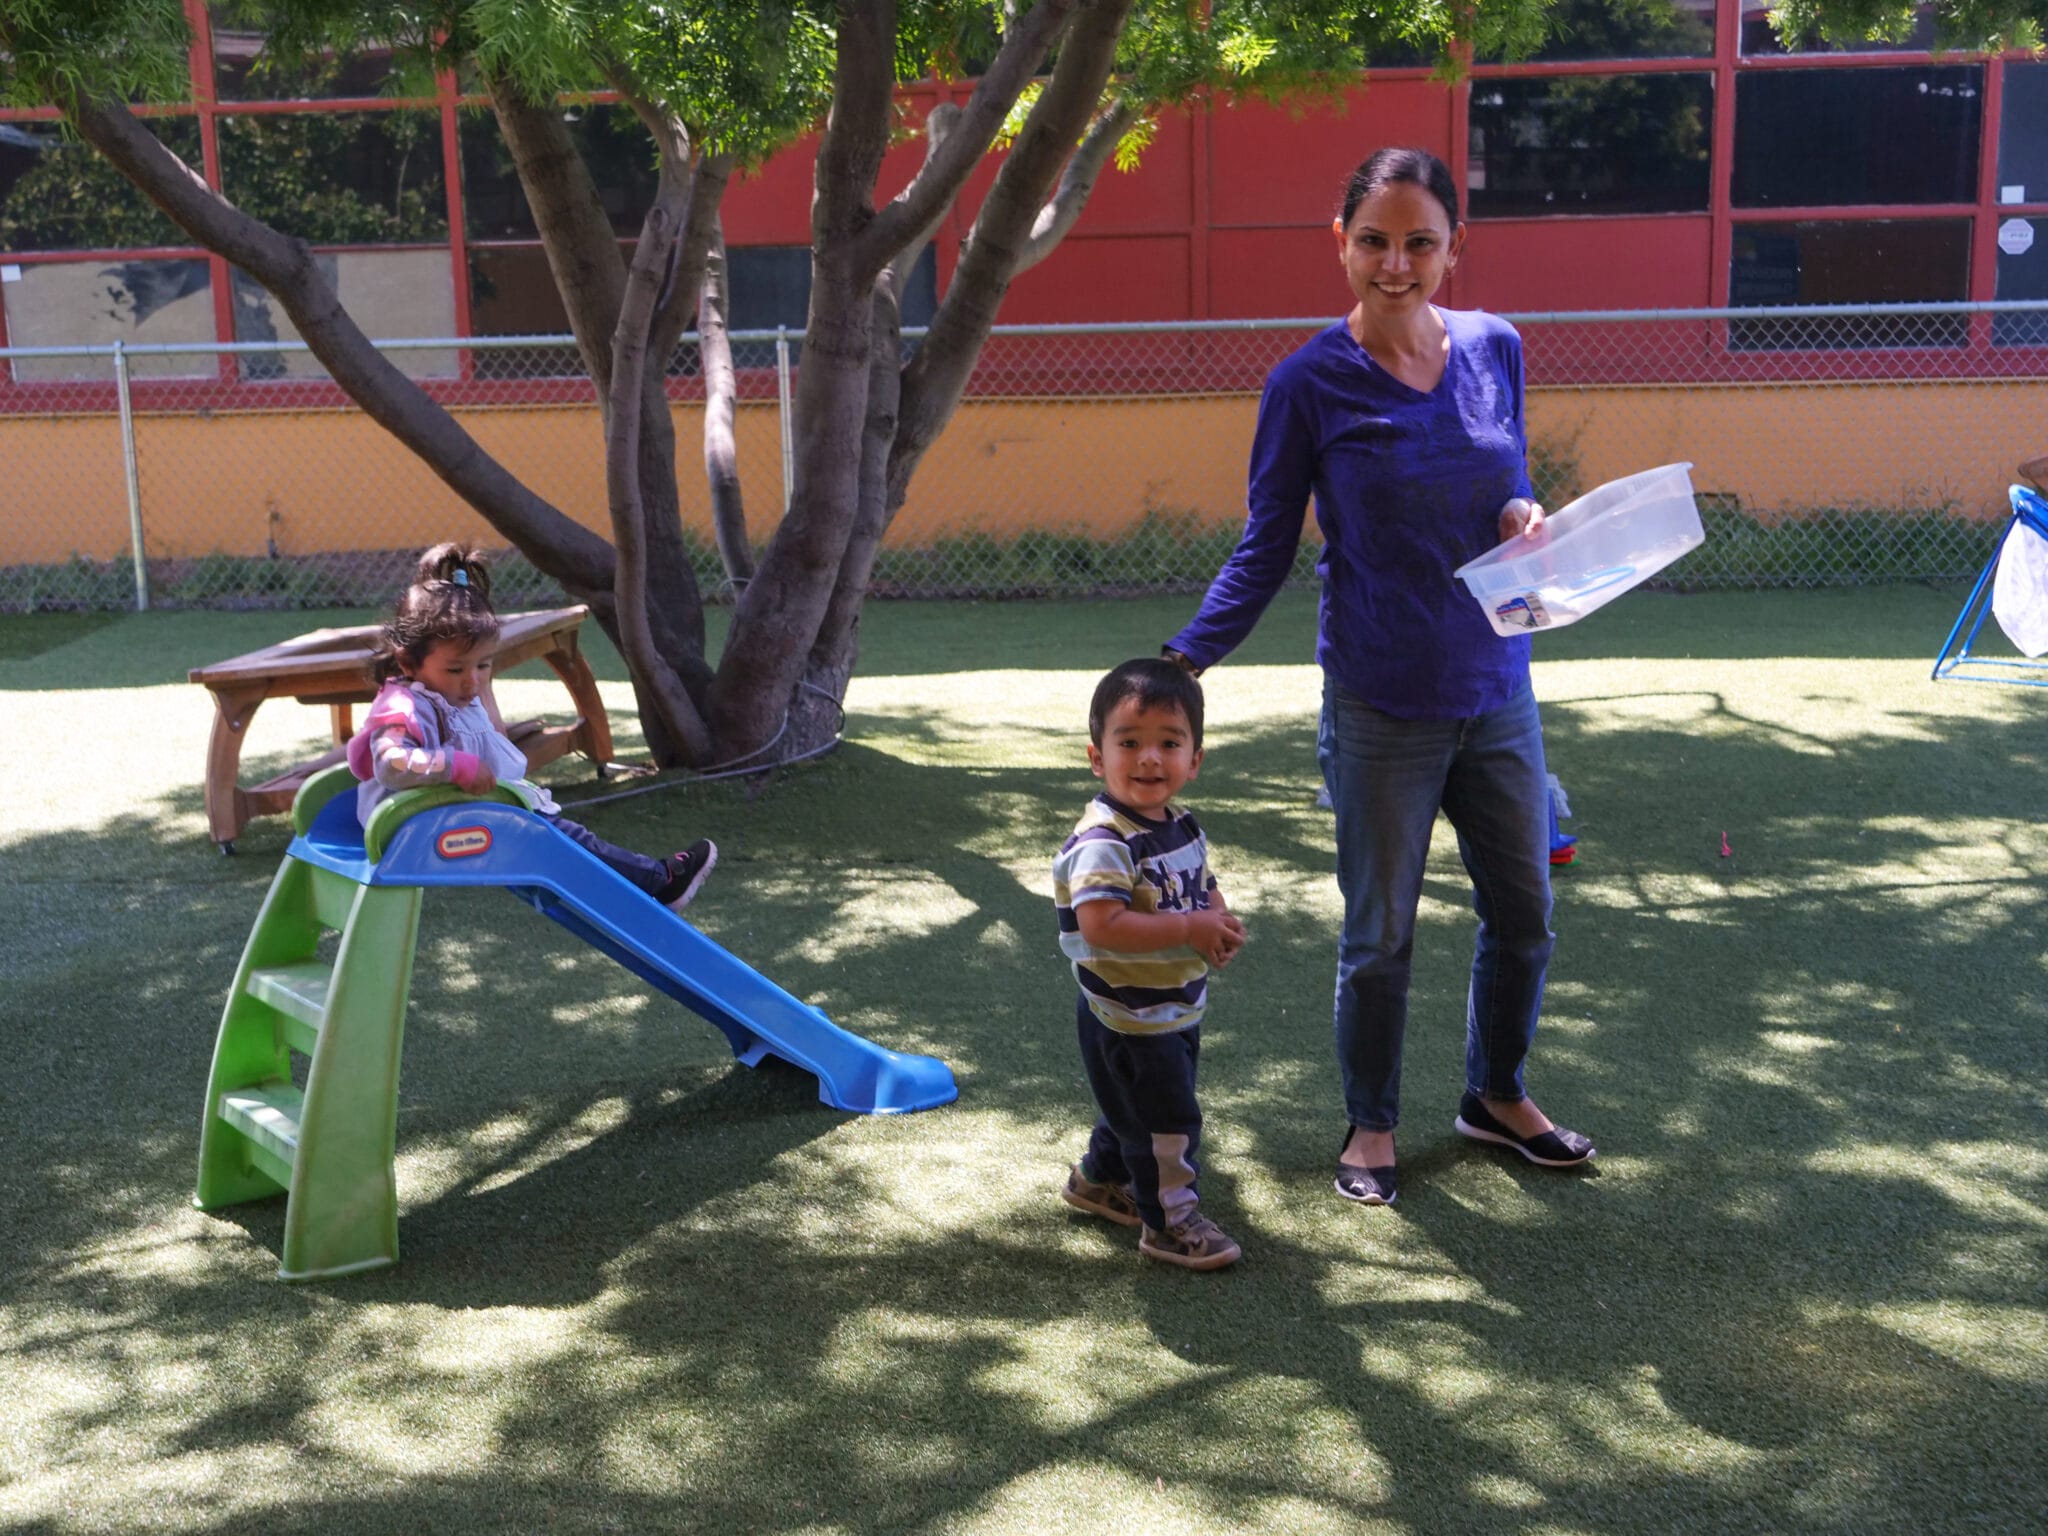 An educator pauses to smile at the camera during outdoor play with two toddlers.